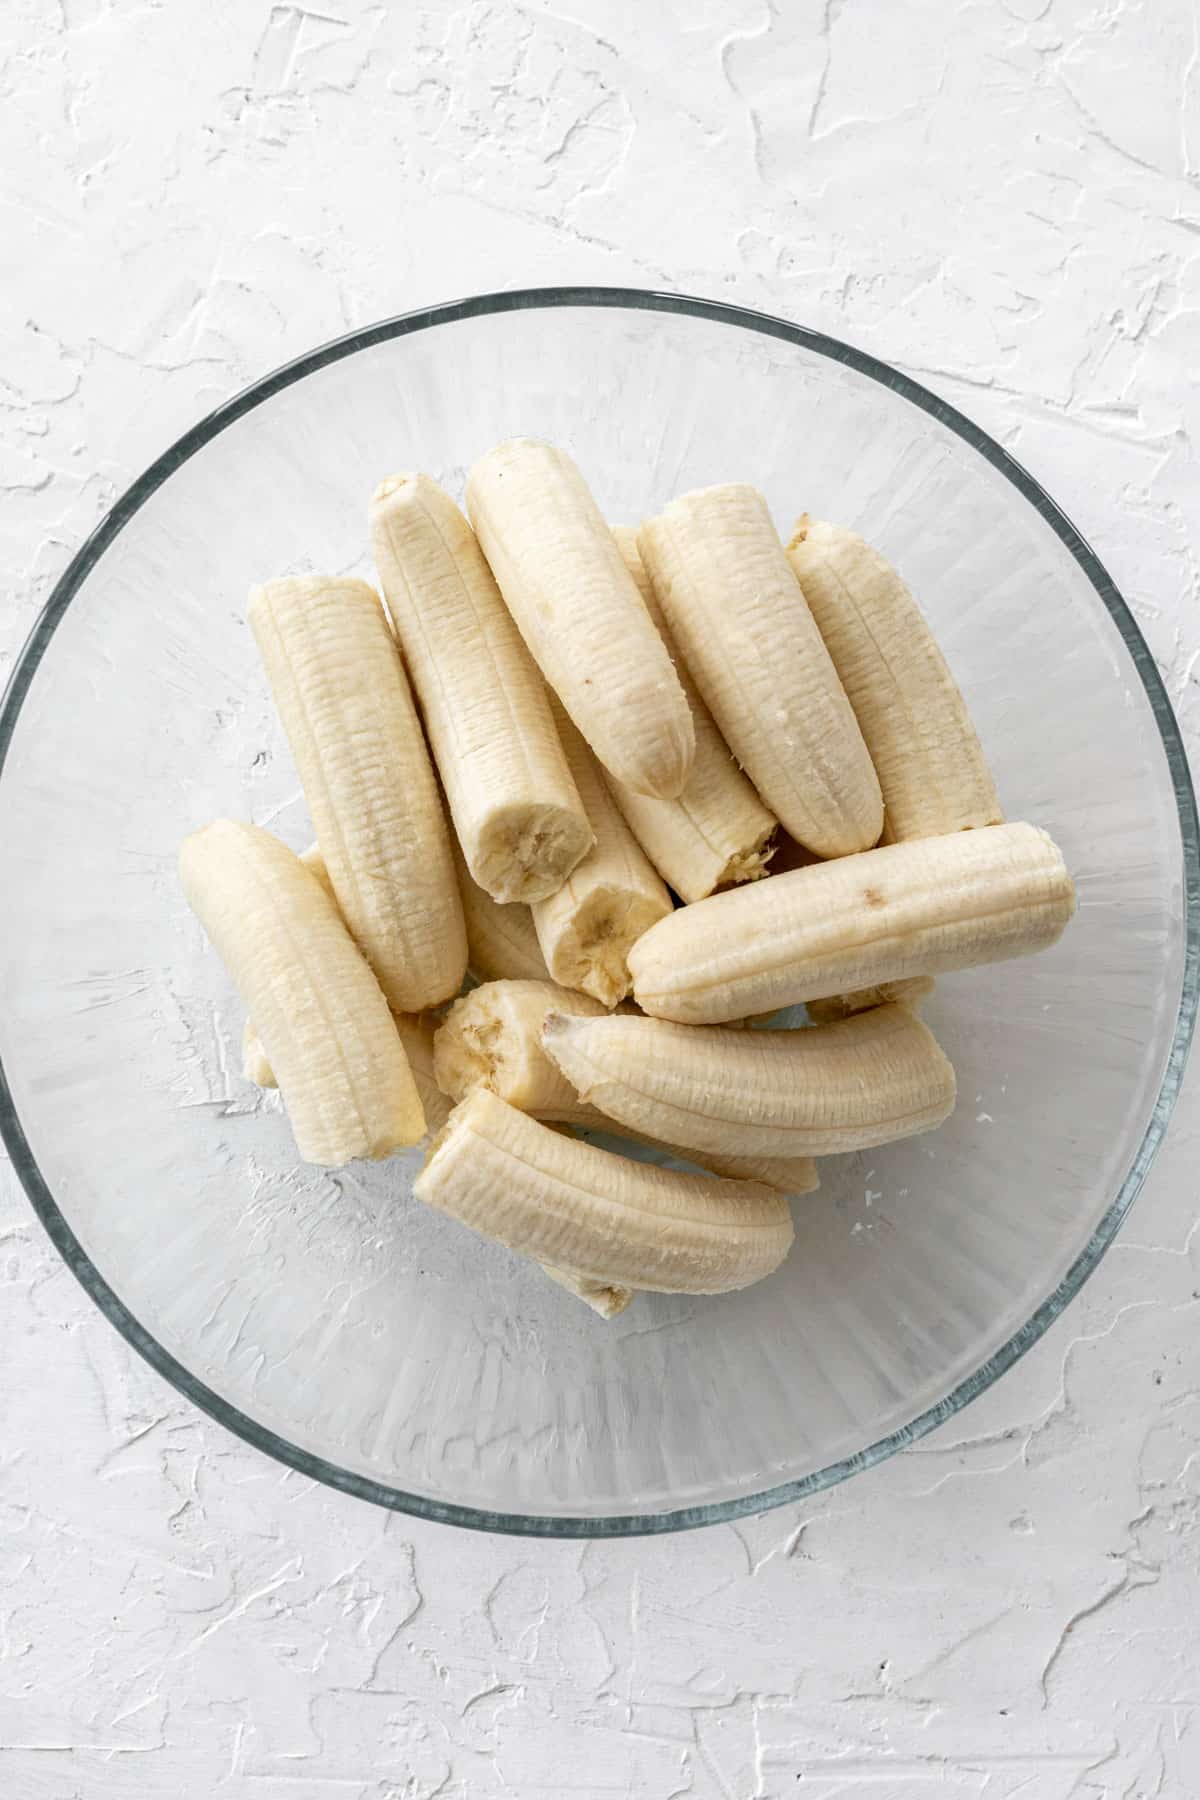 Peeled bananas in a glass bowl.